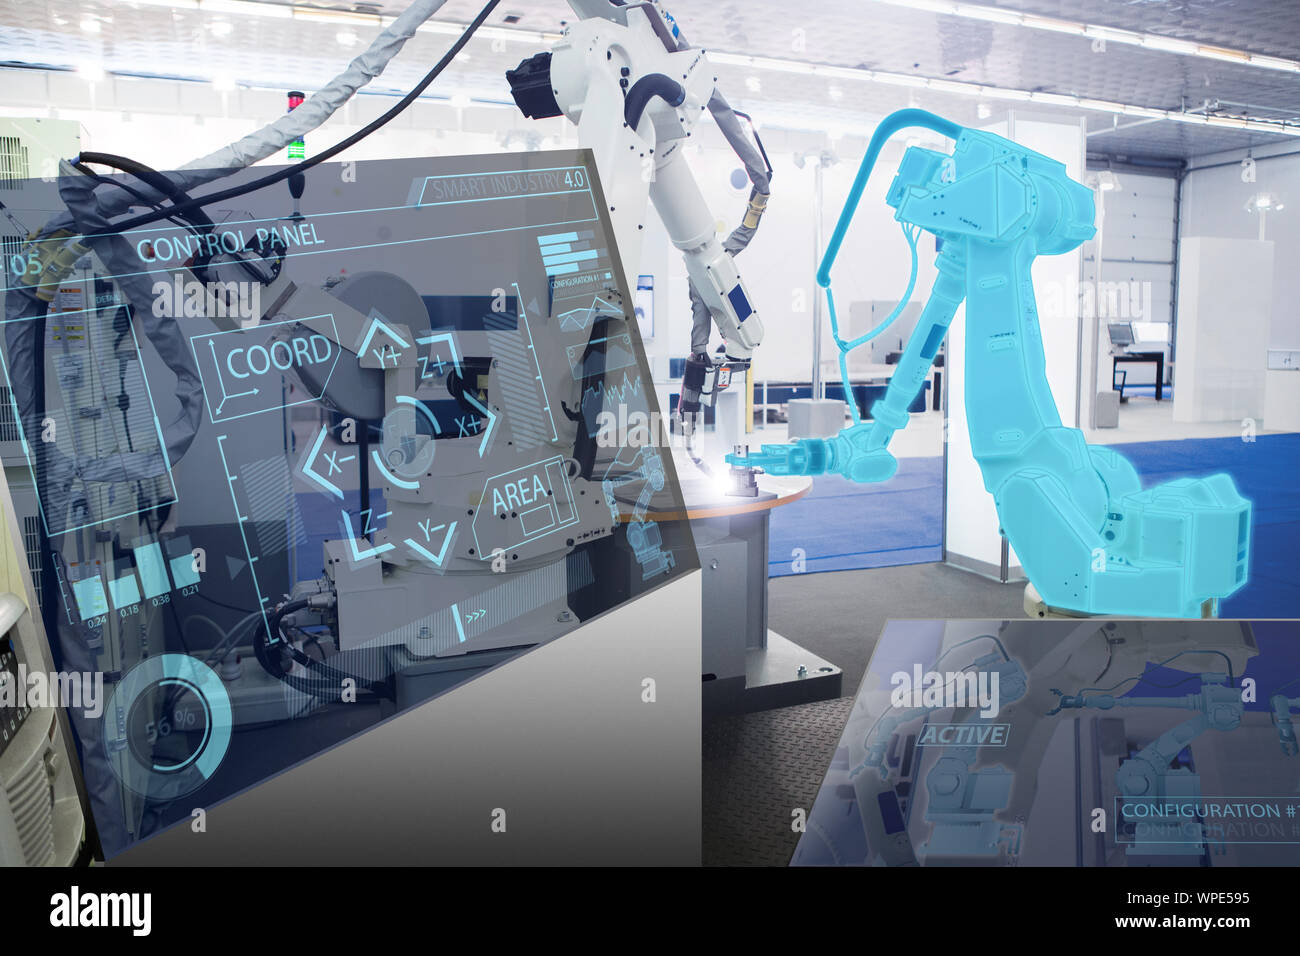 Futuristic transparent computer for control of robots in a smart factory. Smart industry 4.0 concept Stock Photo